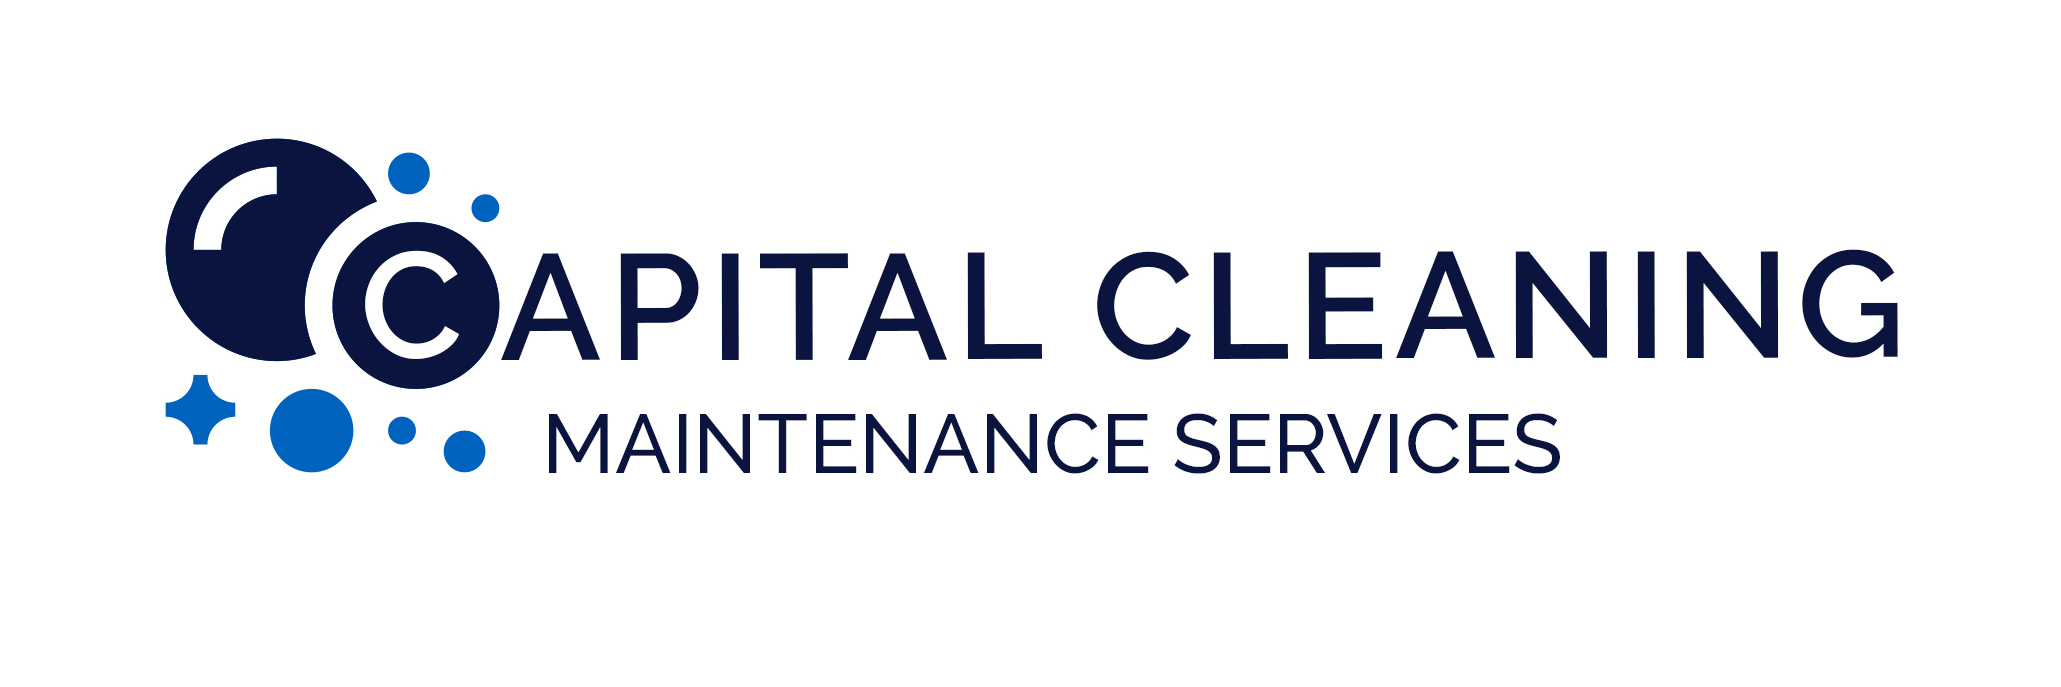 logo for Capital Cleaning Maintence Services Ltd